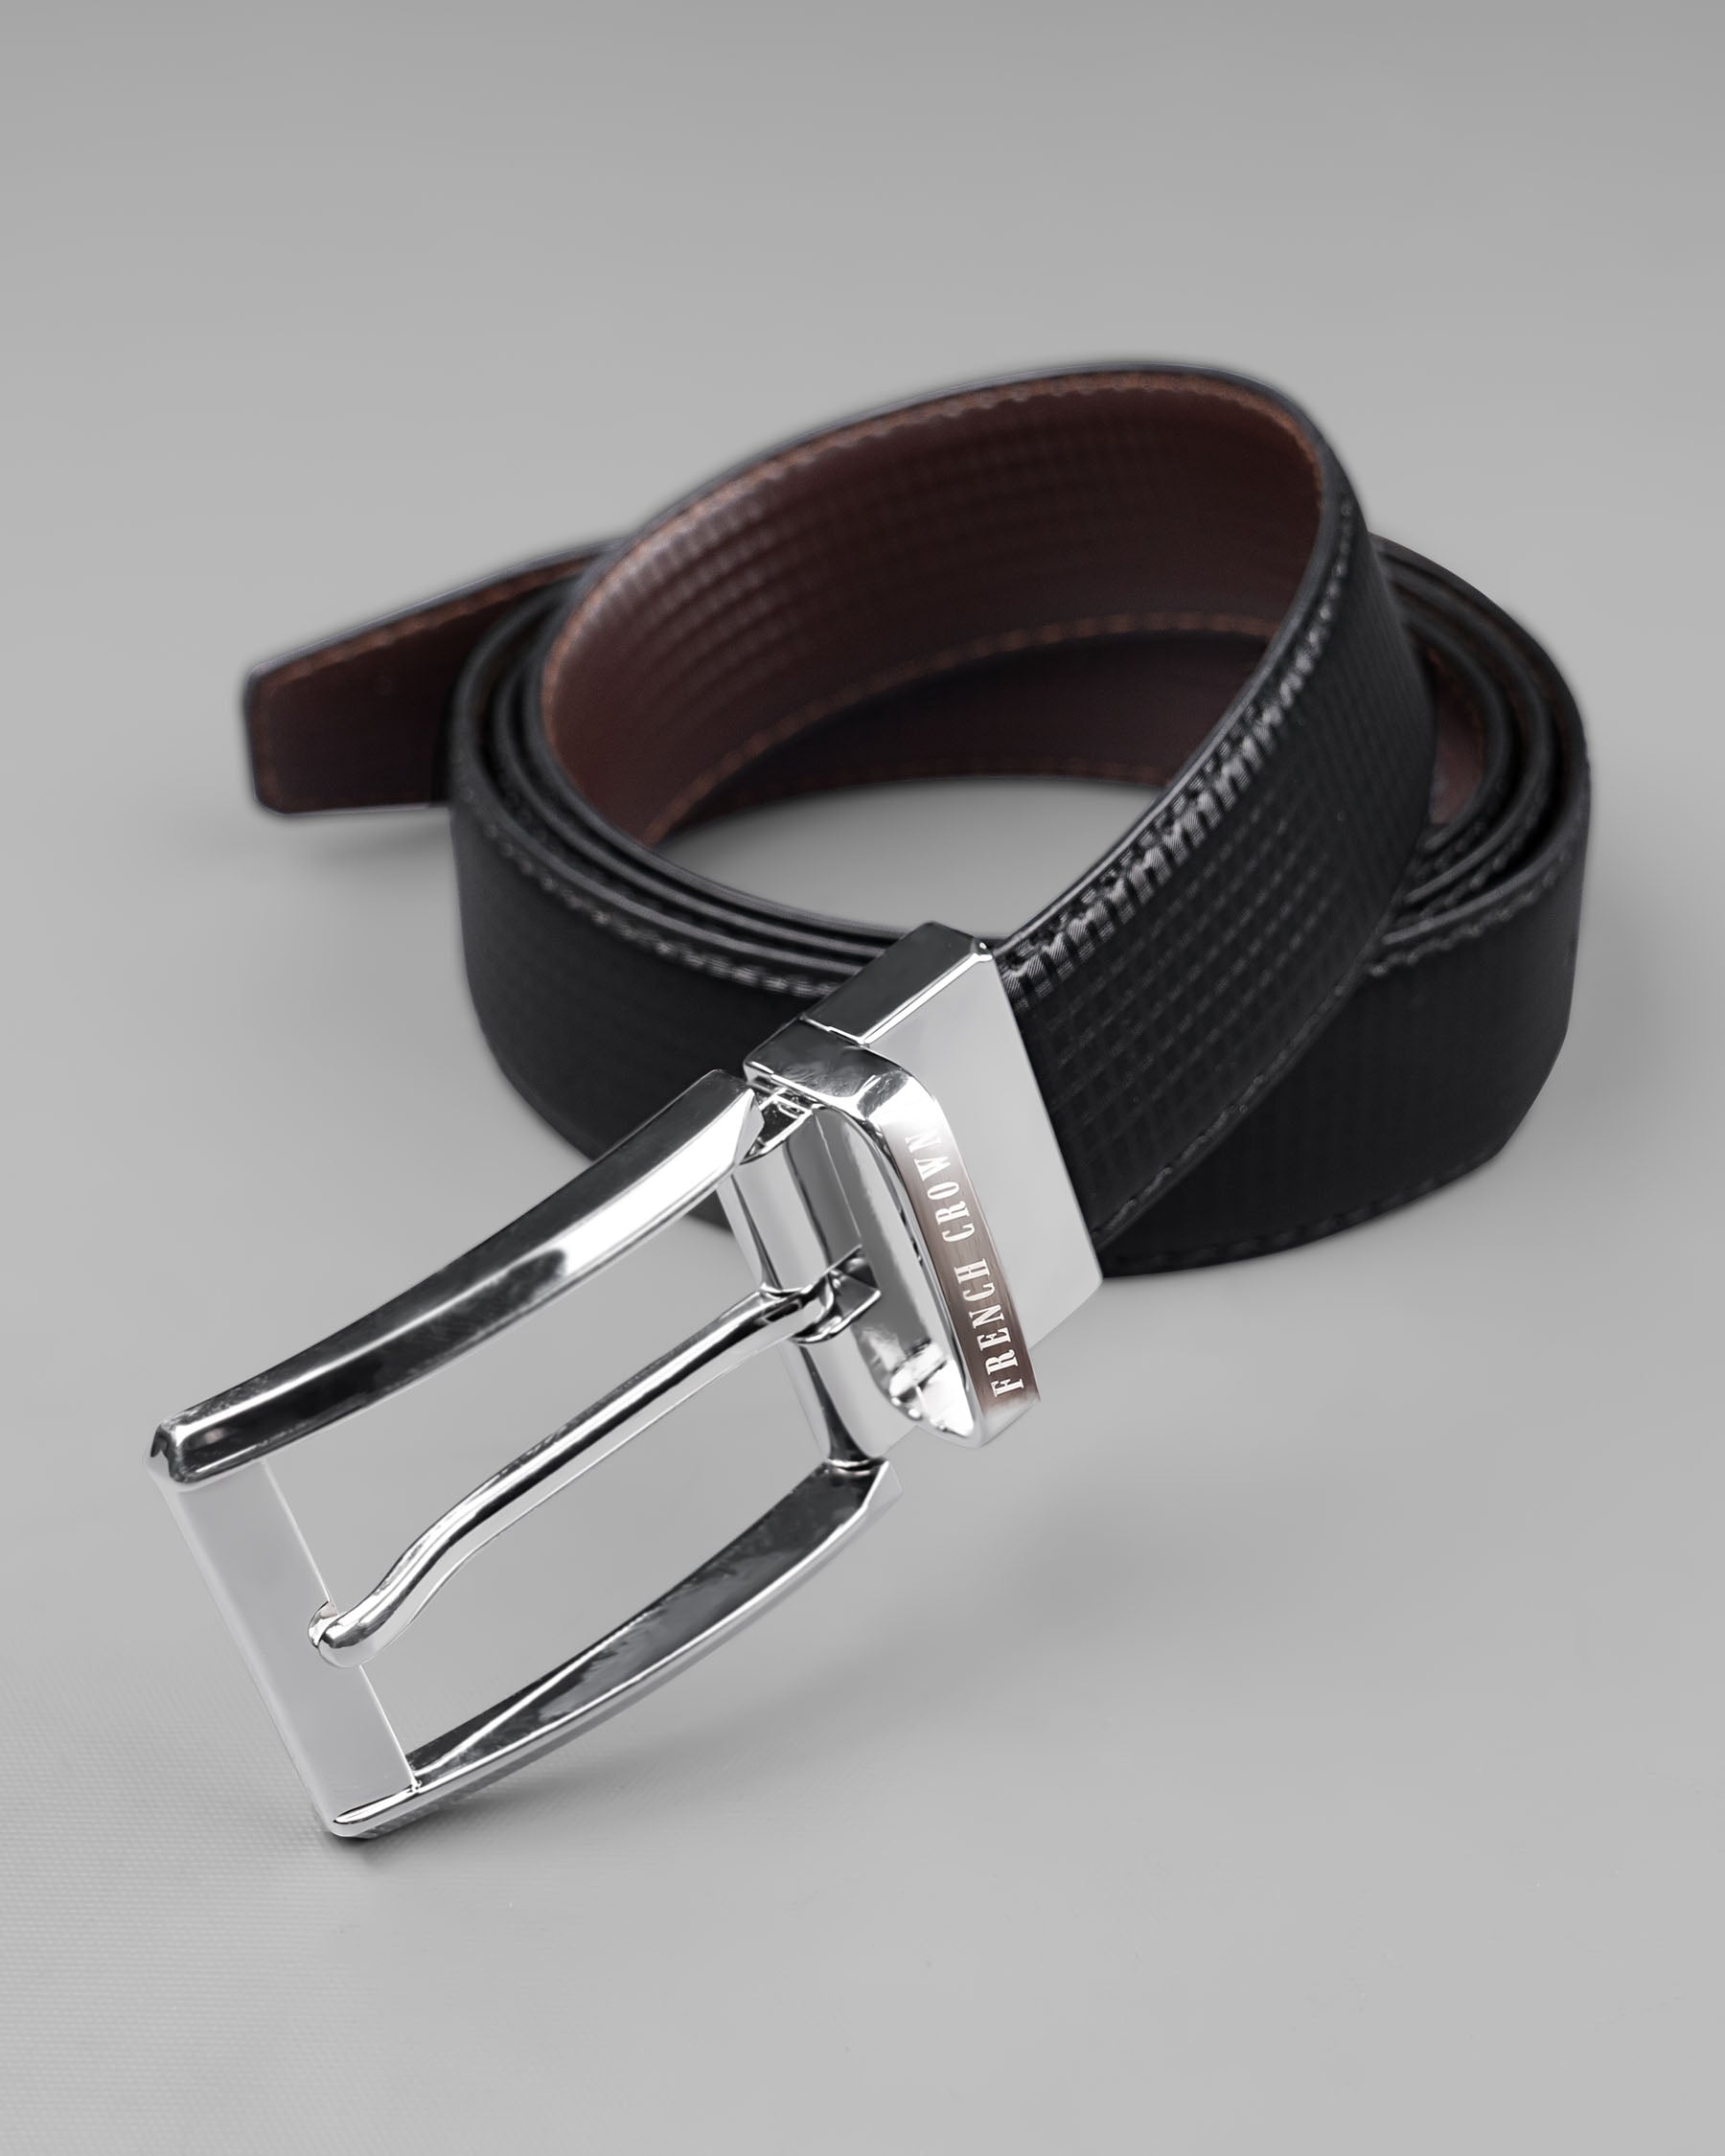 Silver buckled Reversible Black and Brown Vegan Leather Handcrafted Belt